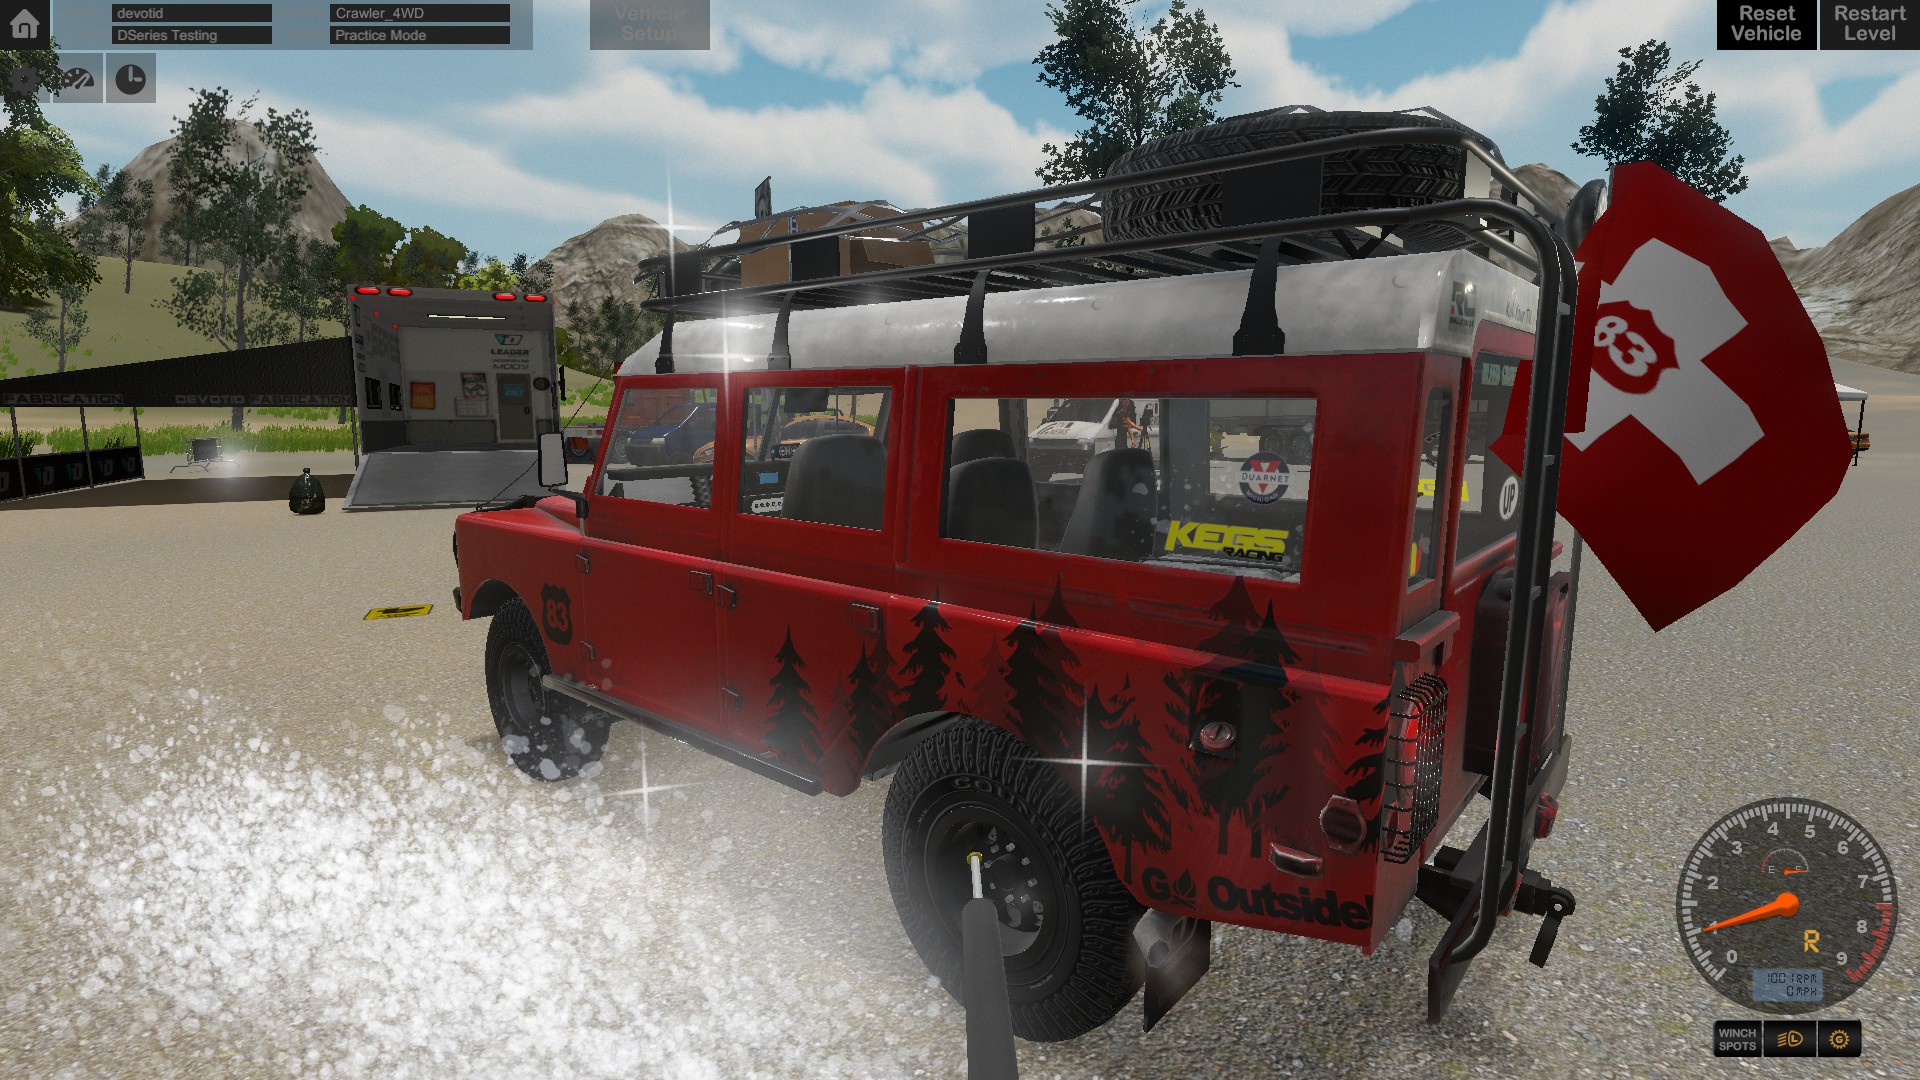 download the new Offroad Vehicle Simulation